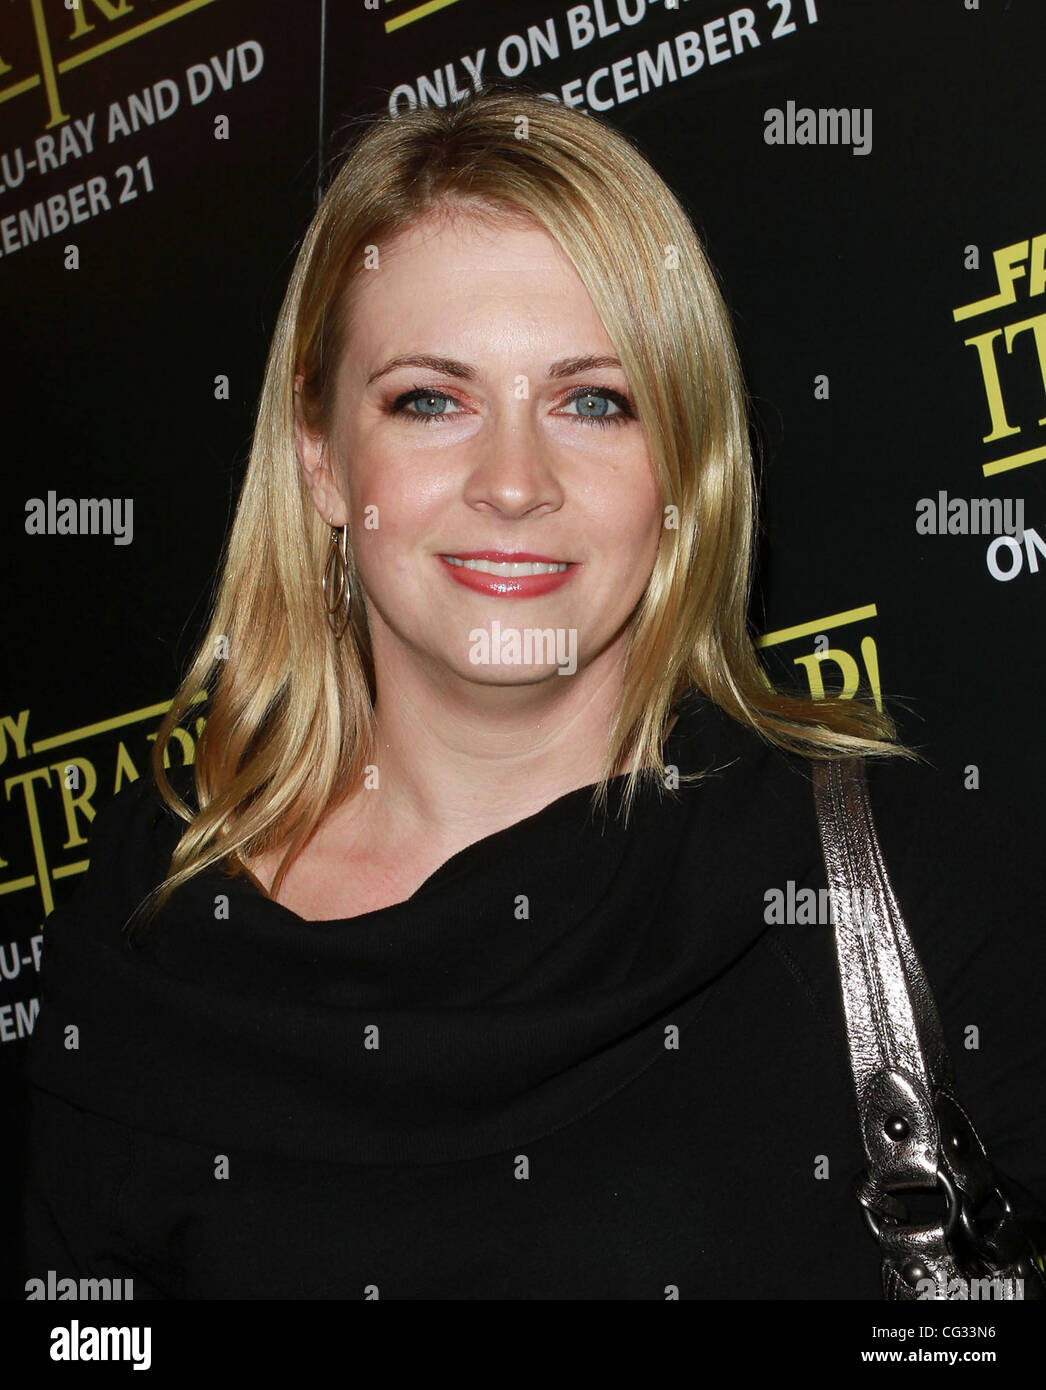 Melissa Joan Hart 'Family Guy: It's A Trap' DVD Launch Party held at Supperclub Hollywood, California - 14.12.10 Stock Photo